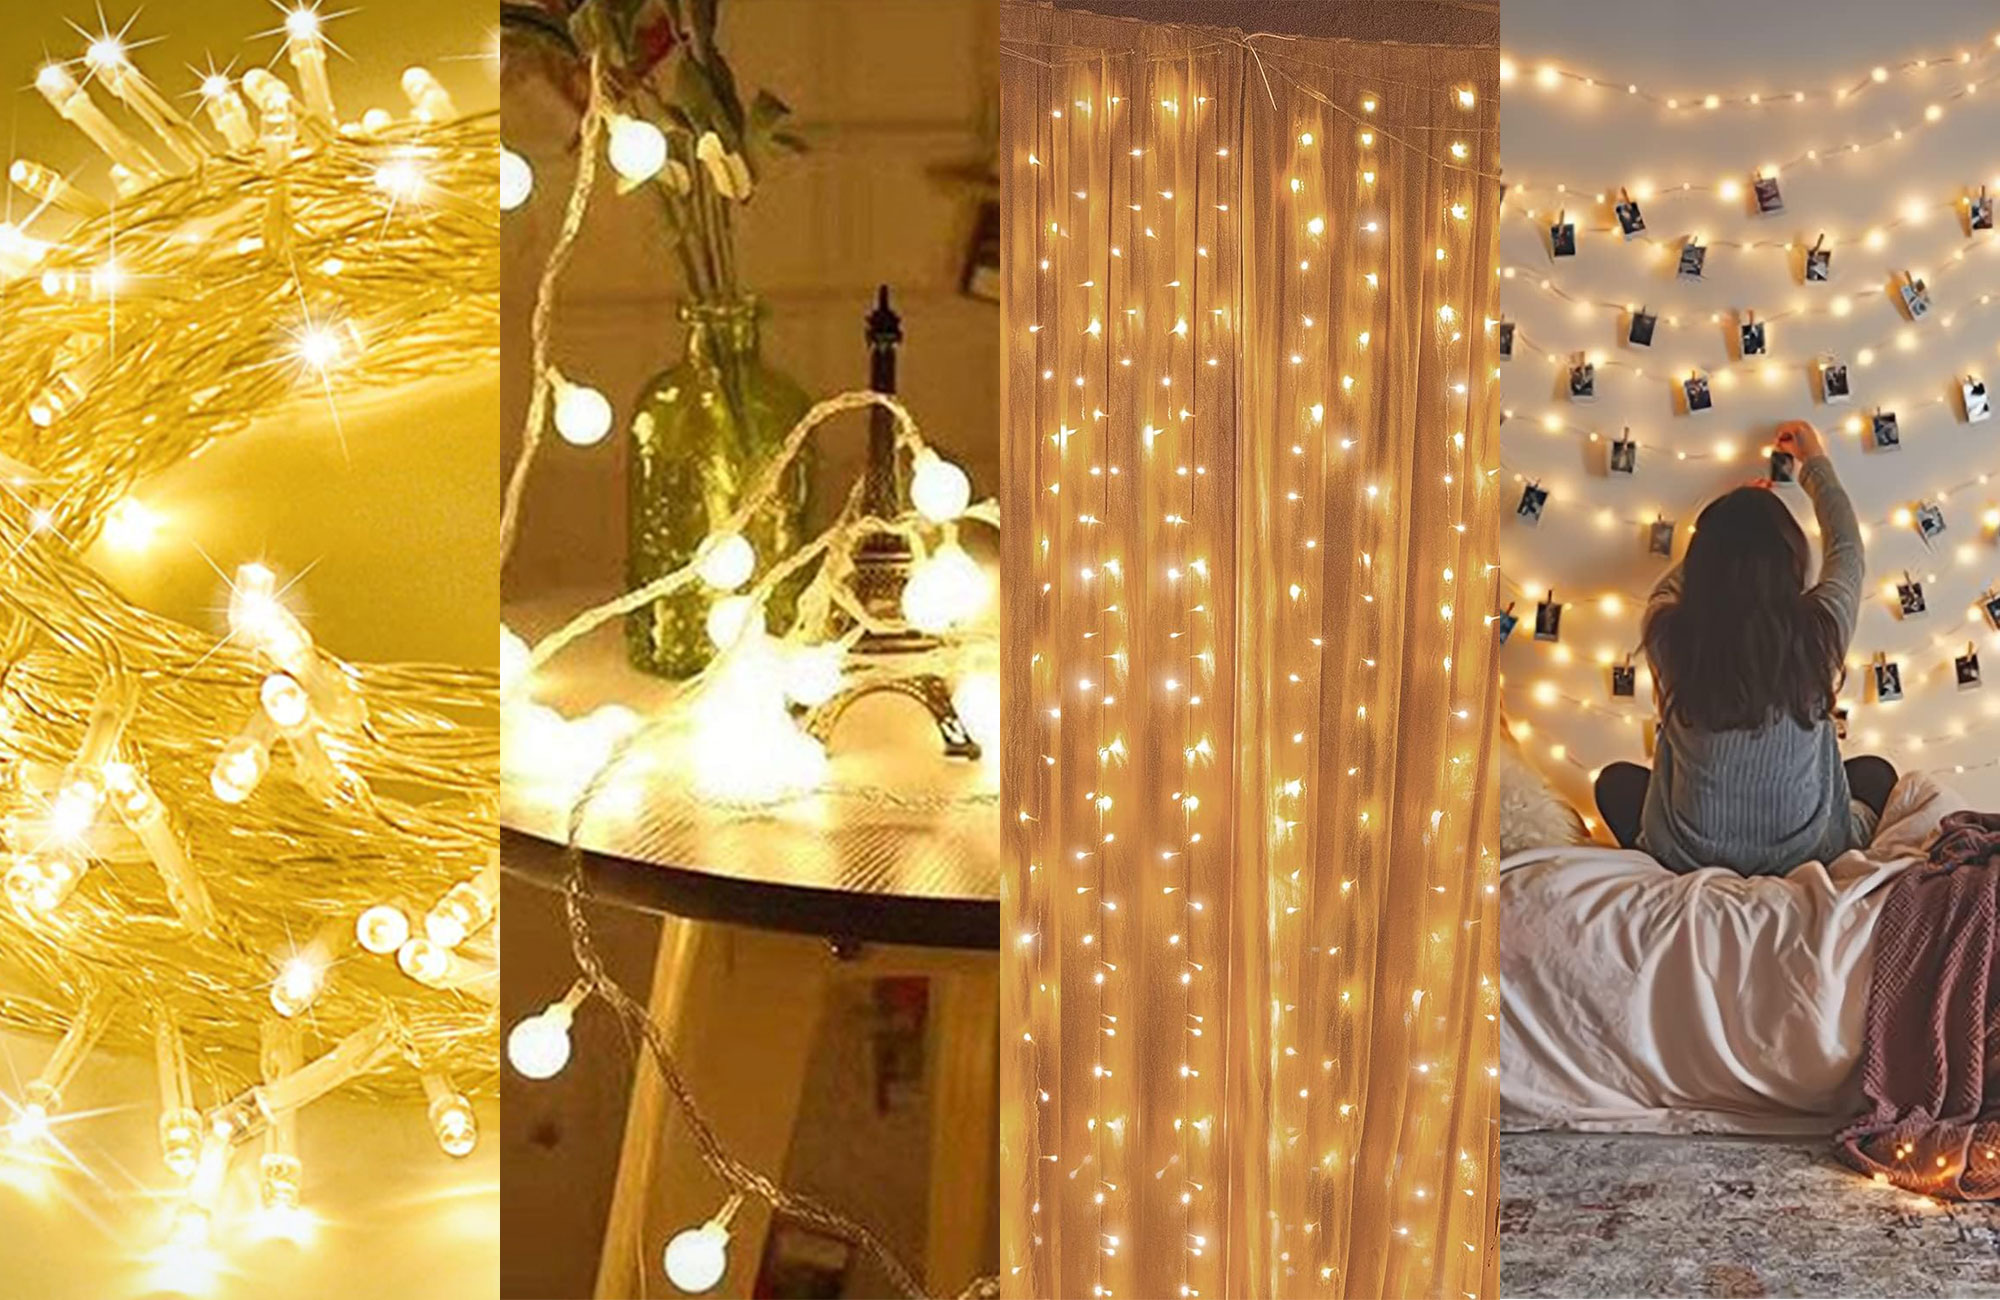 A lineup of the best string lights for bedroom side by side